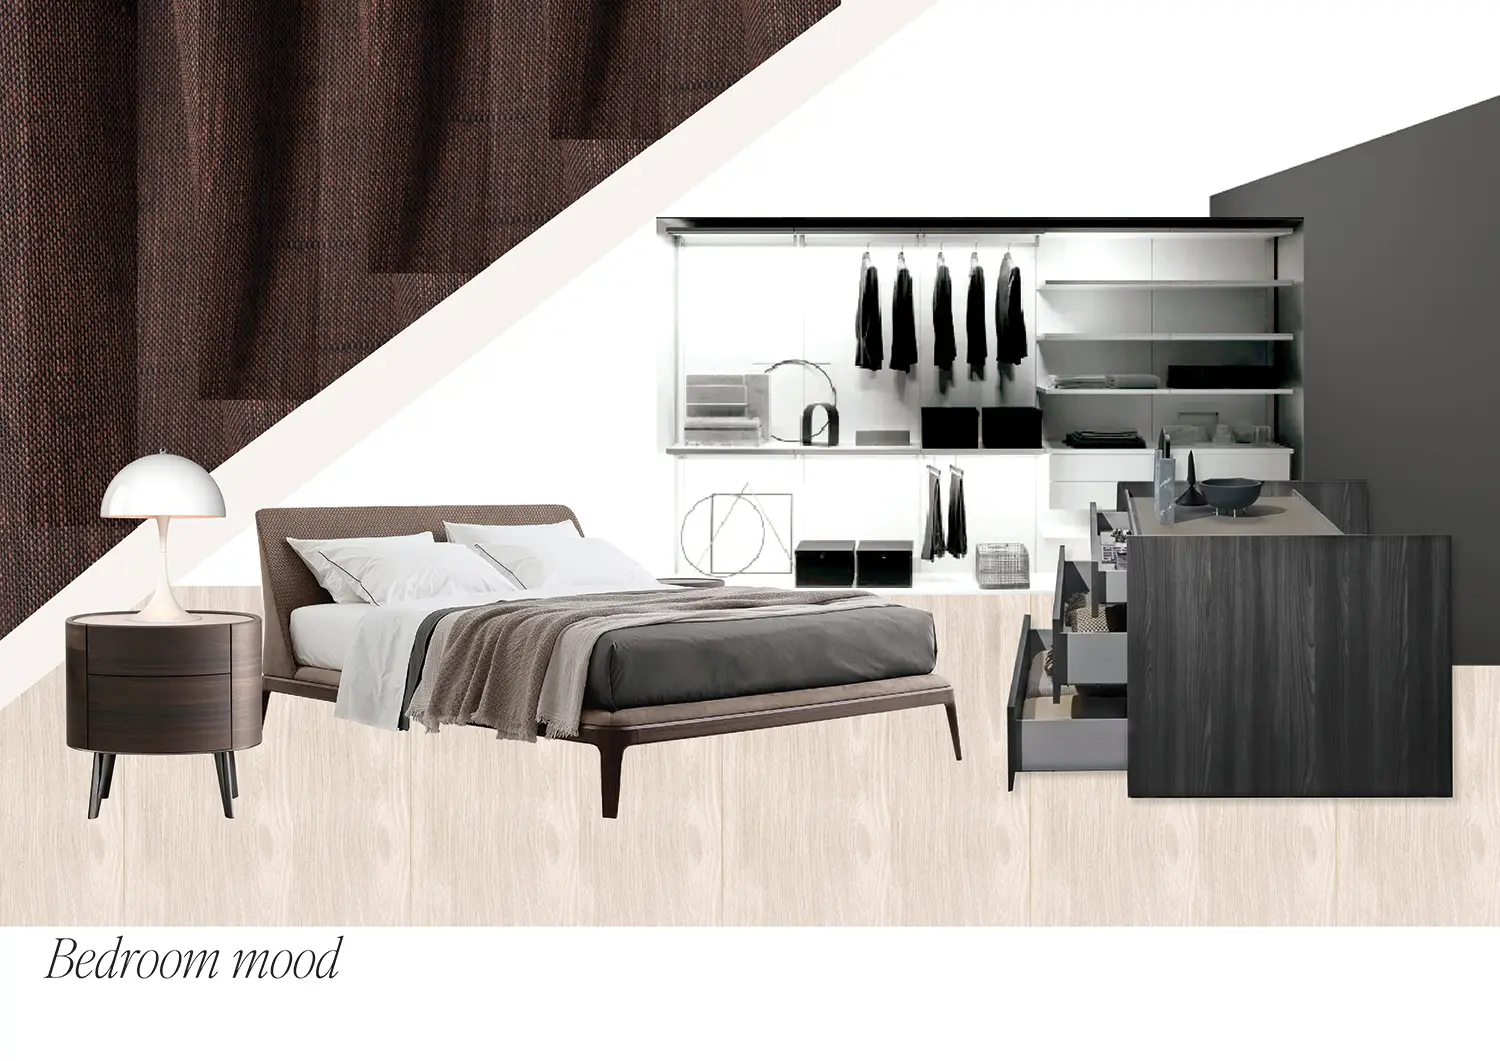 Moodboard of inspiration for the choice of furniture and materials for the bedroom and wardrobe renovation project.